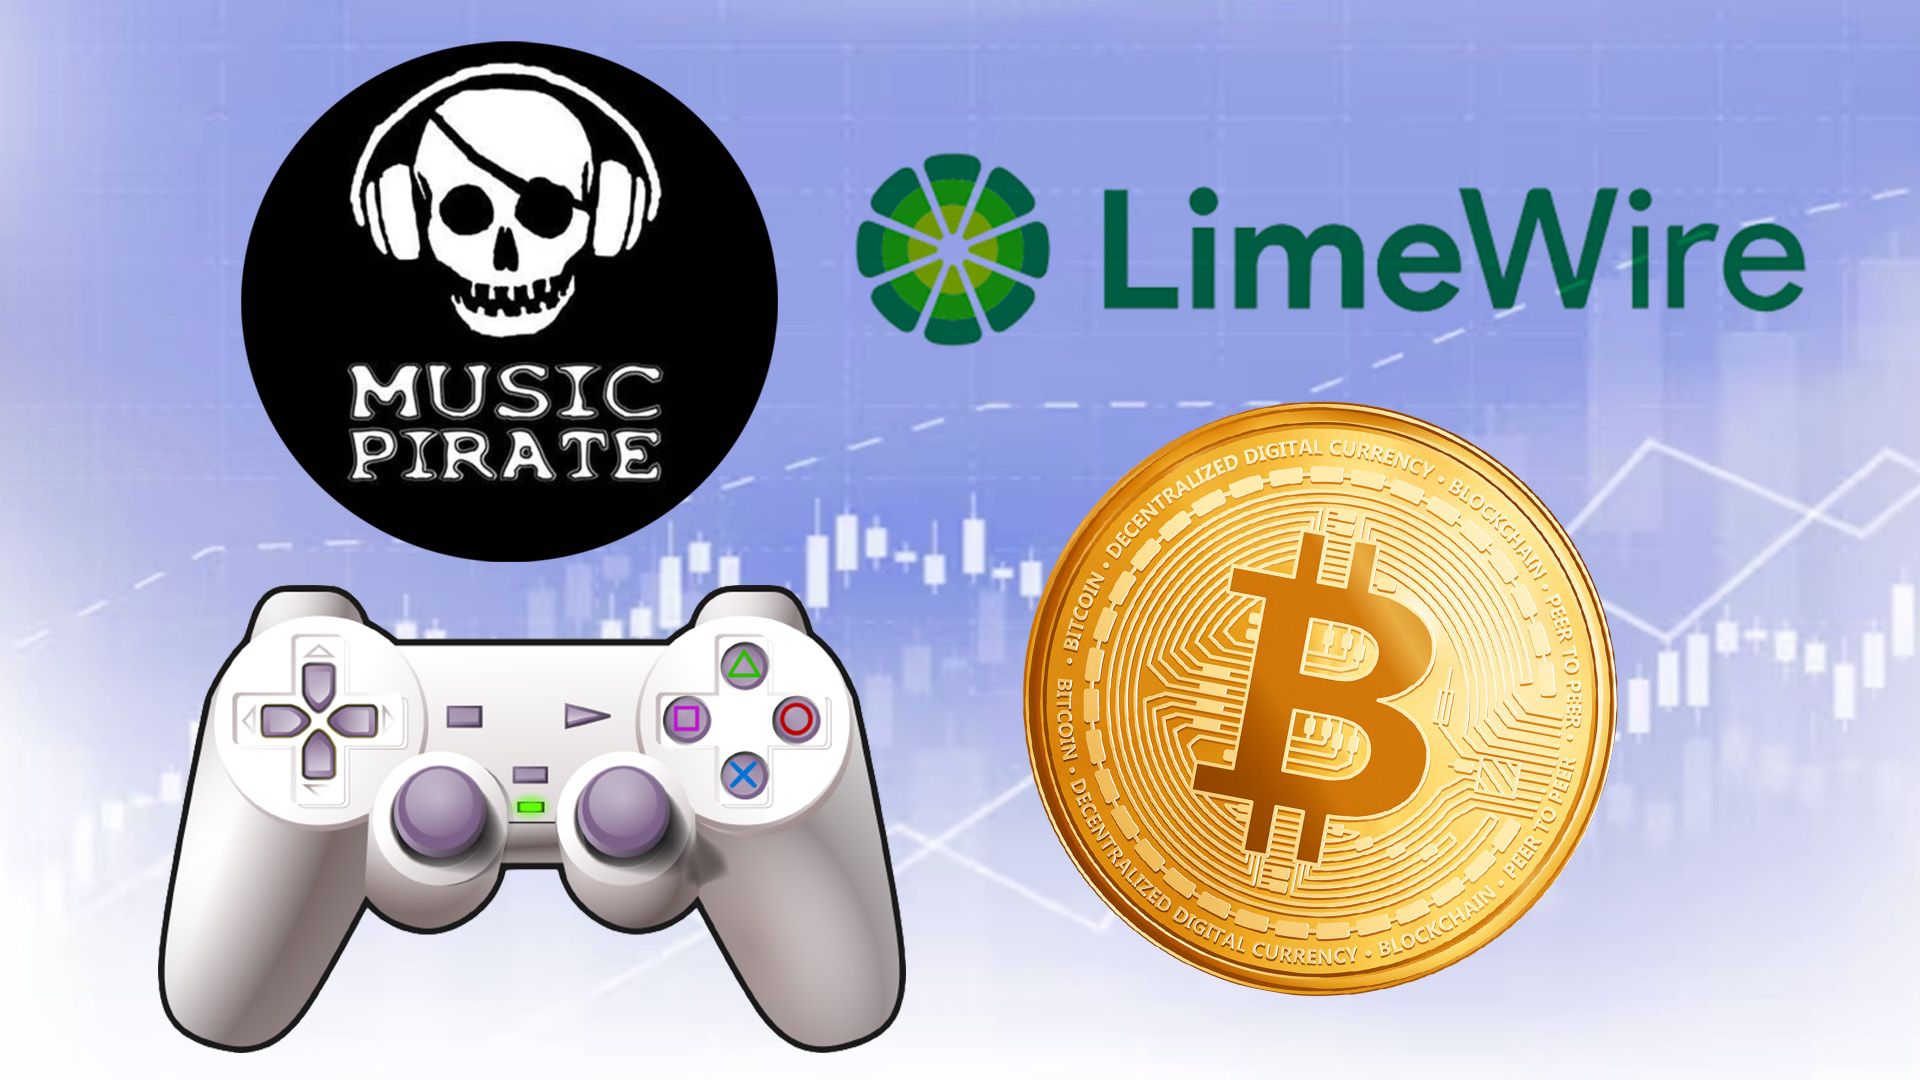 All About LimeWire And The New Game That Pays In Crypto